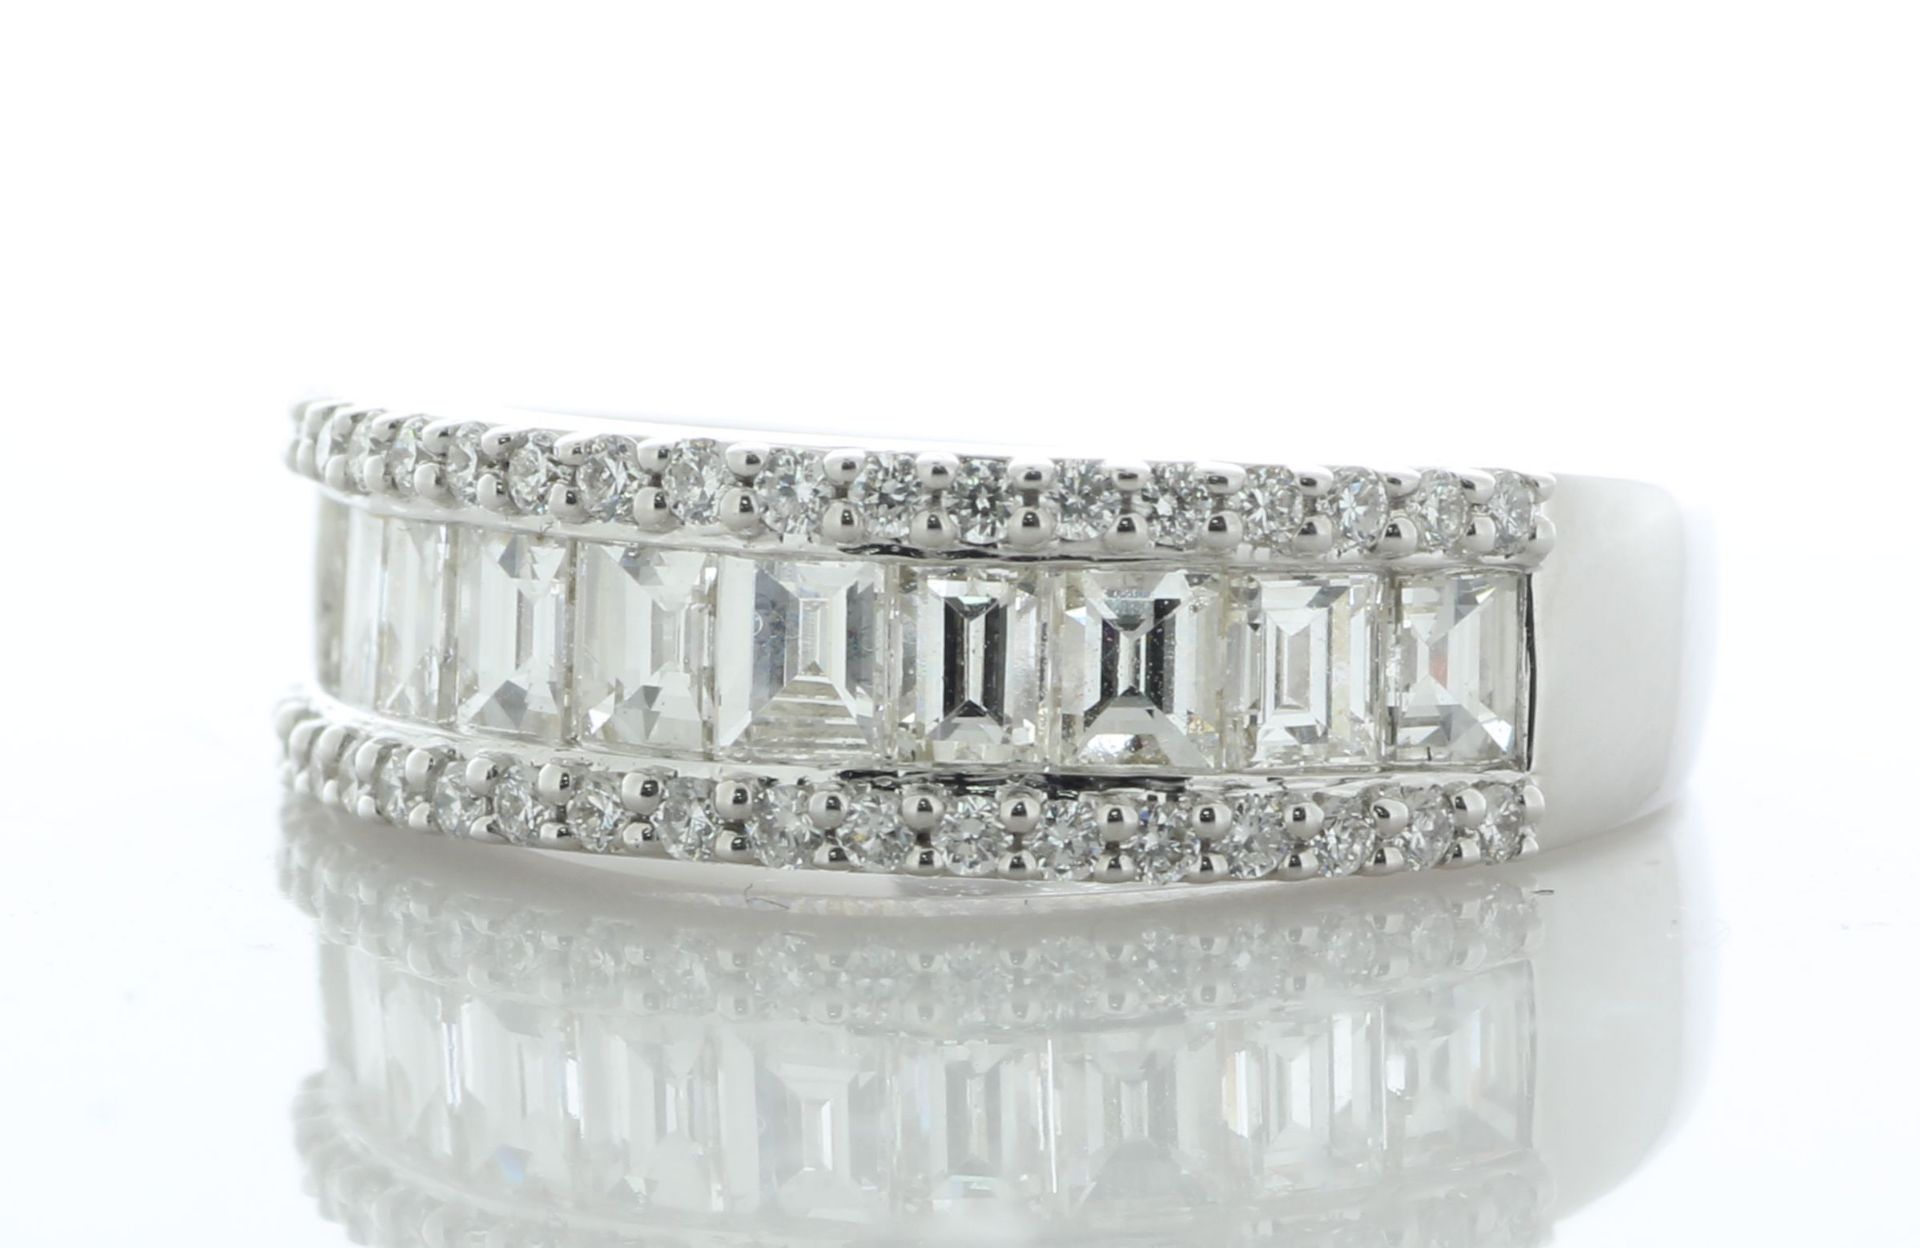 18ct White Gold Channel Set Semi Eternity Diamond Ring 1.37 Carats - Valued By IDI £10,265.00 - - Image 2 of 5